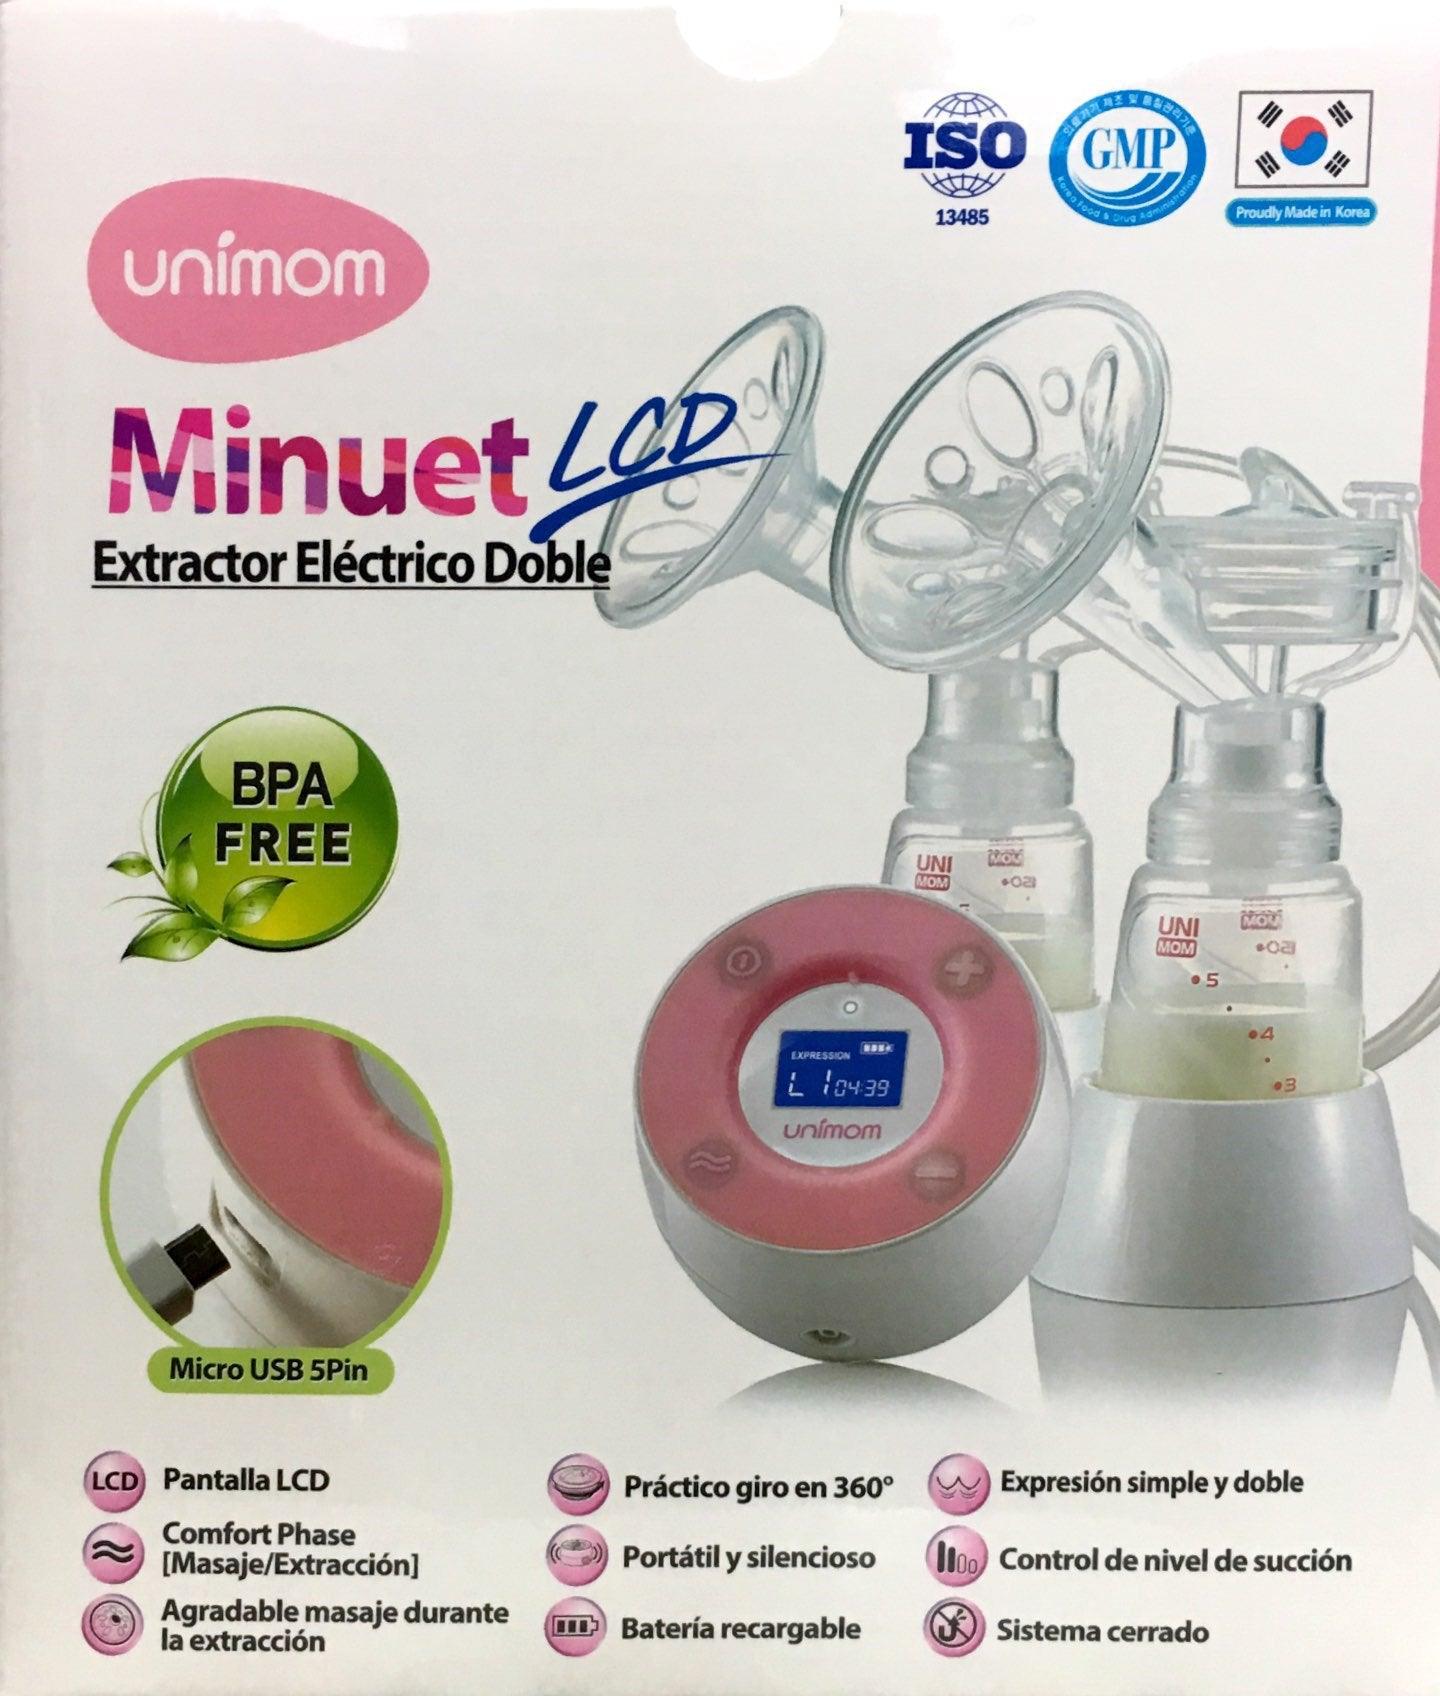 Unimom Minuet Electronic Breast Pump Free Switch Kit Free Storage Bags 60 pack